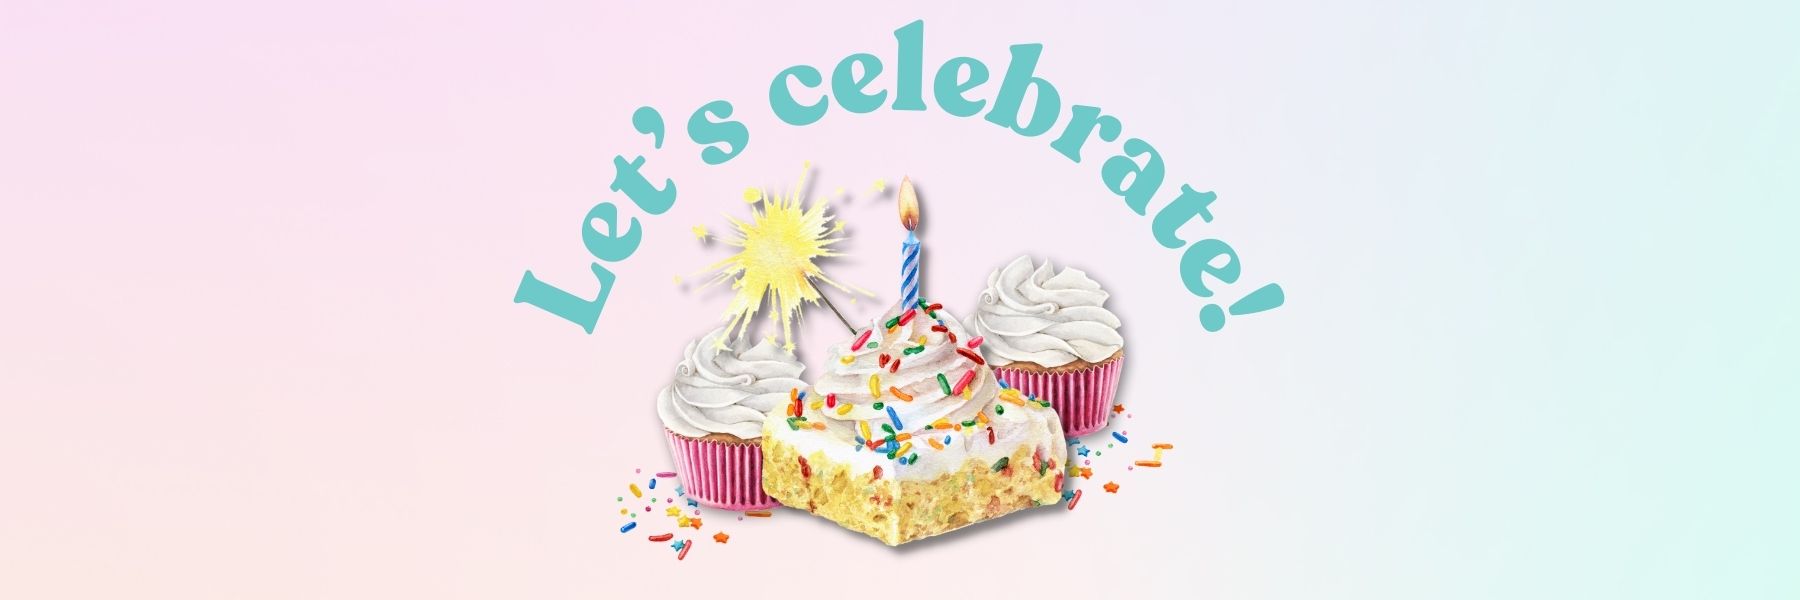 It's our 6th BIRTHDAY!